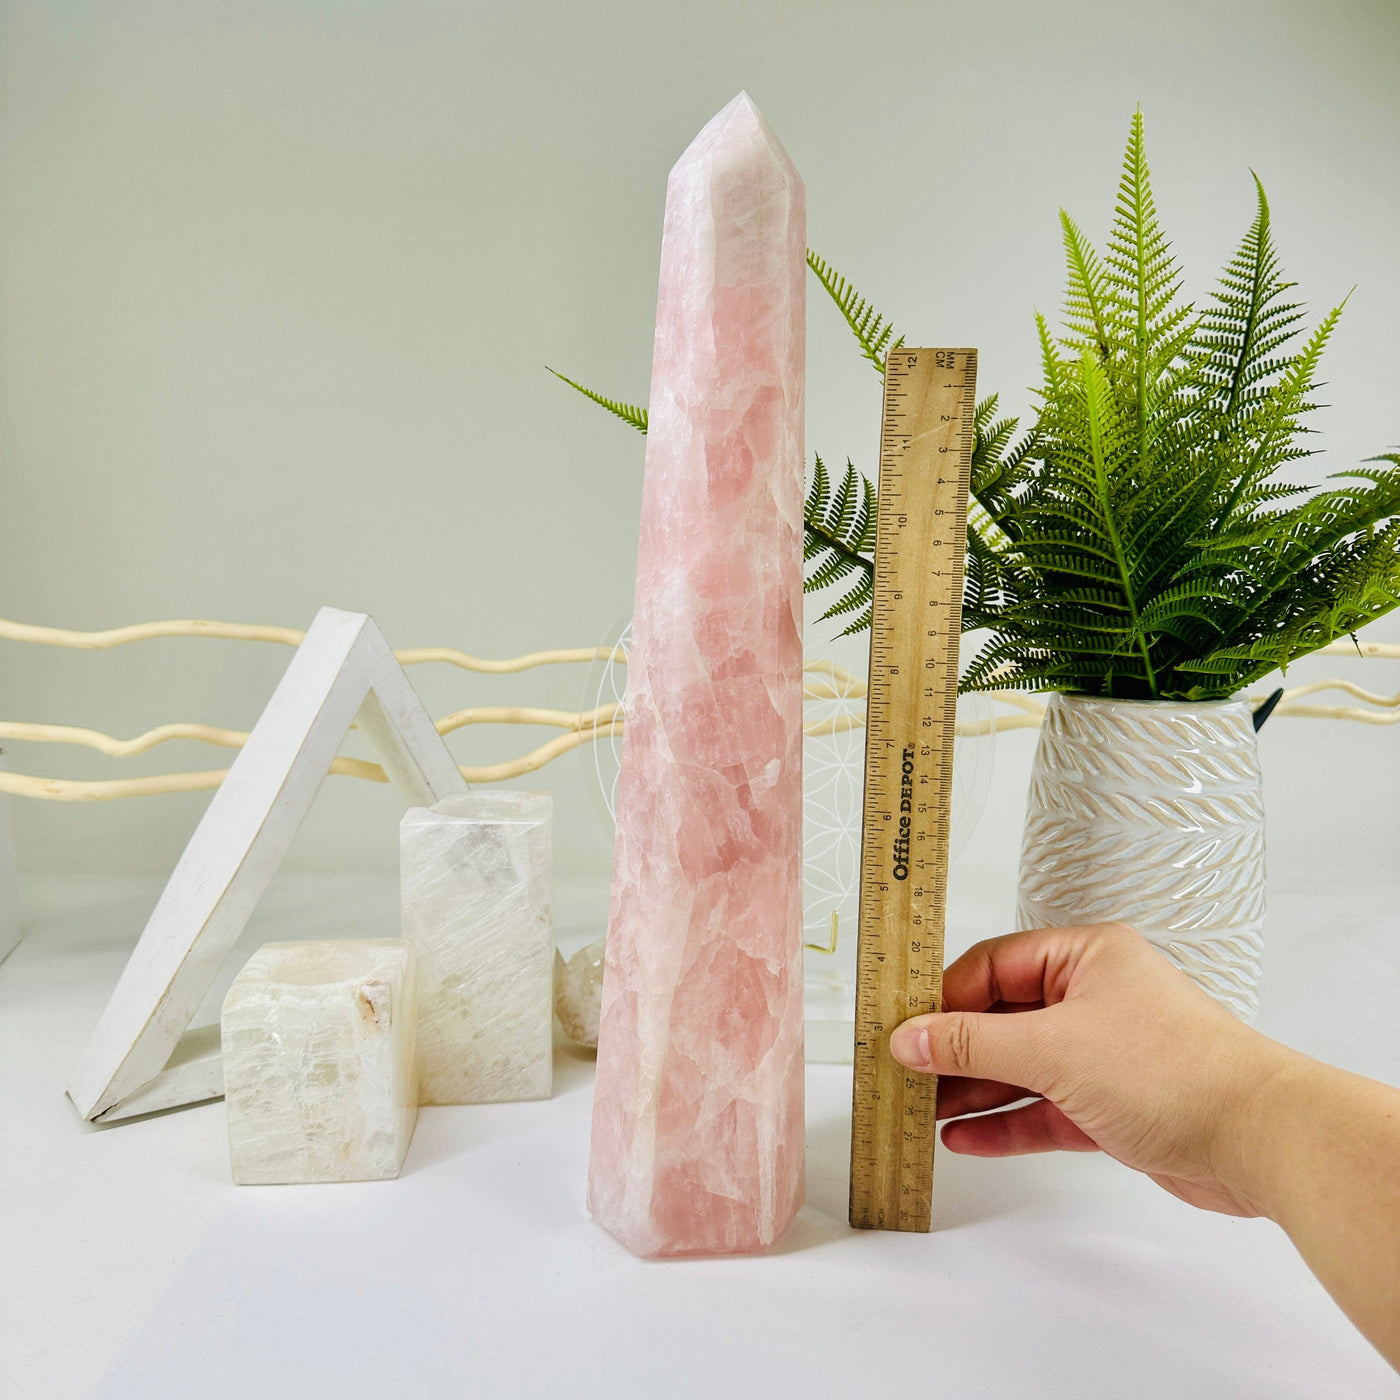 Rose Quartz Polished Crystal Tower - OOAK with hand and ruler for size reference